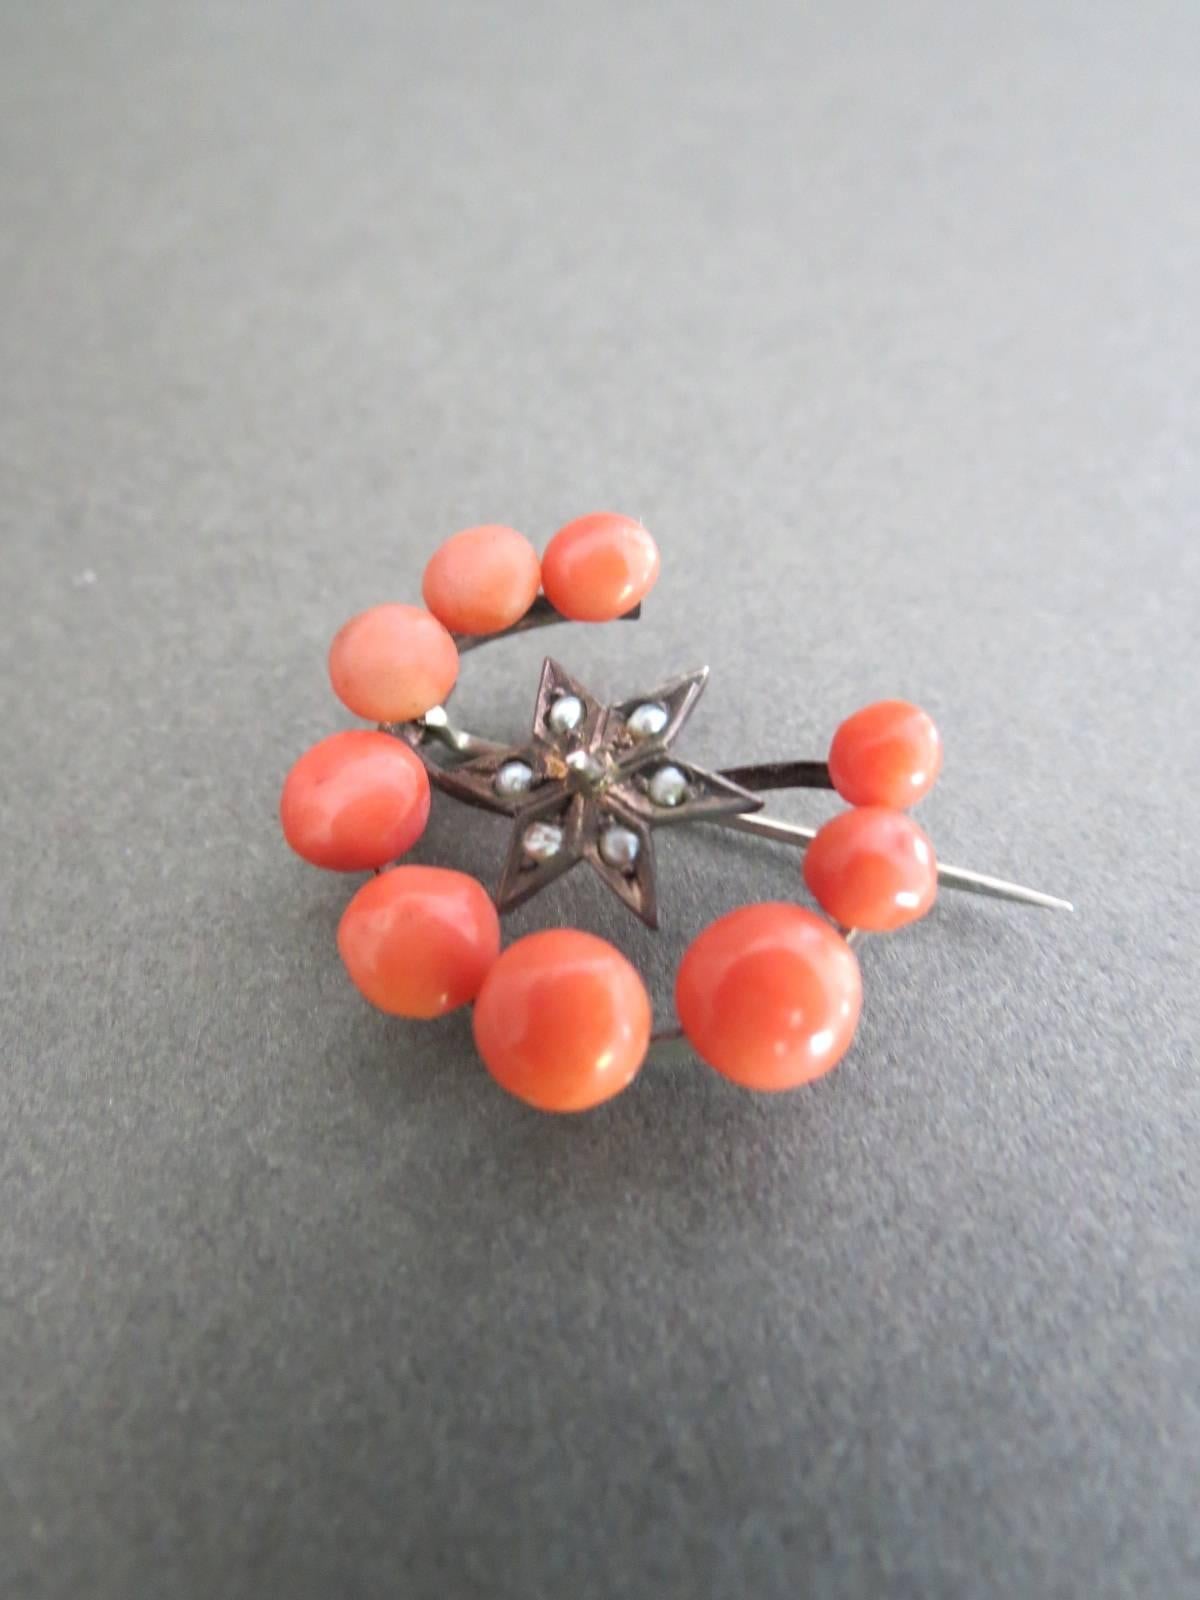 Vintage Victorian Sterling Silver Salmon Coral Seed Pearl Crescent Moon Star Brooch.
Item Specifics
Height: 2.6cm (approx 1.00